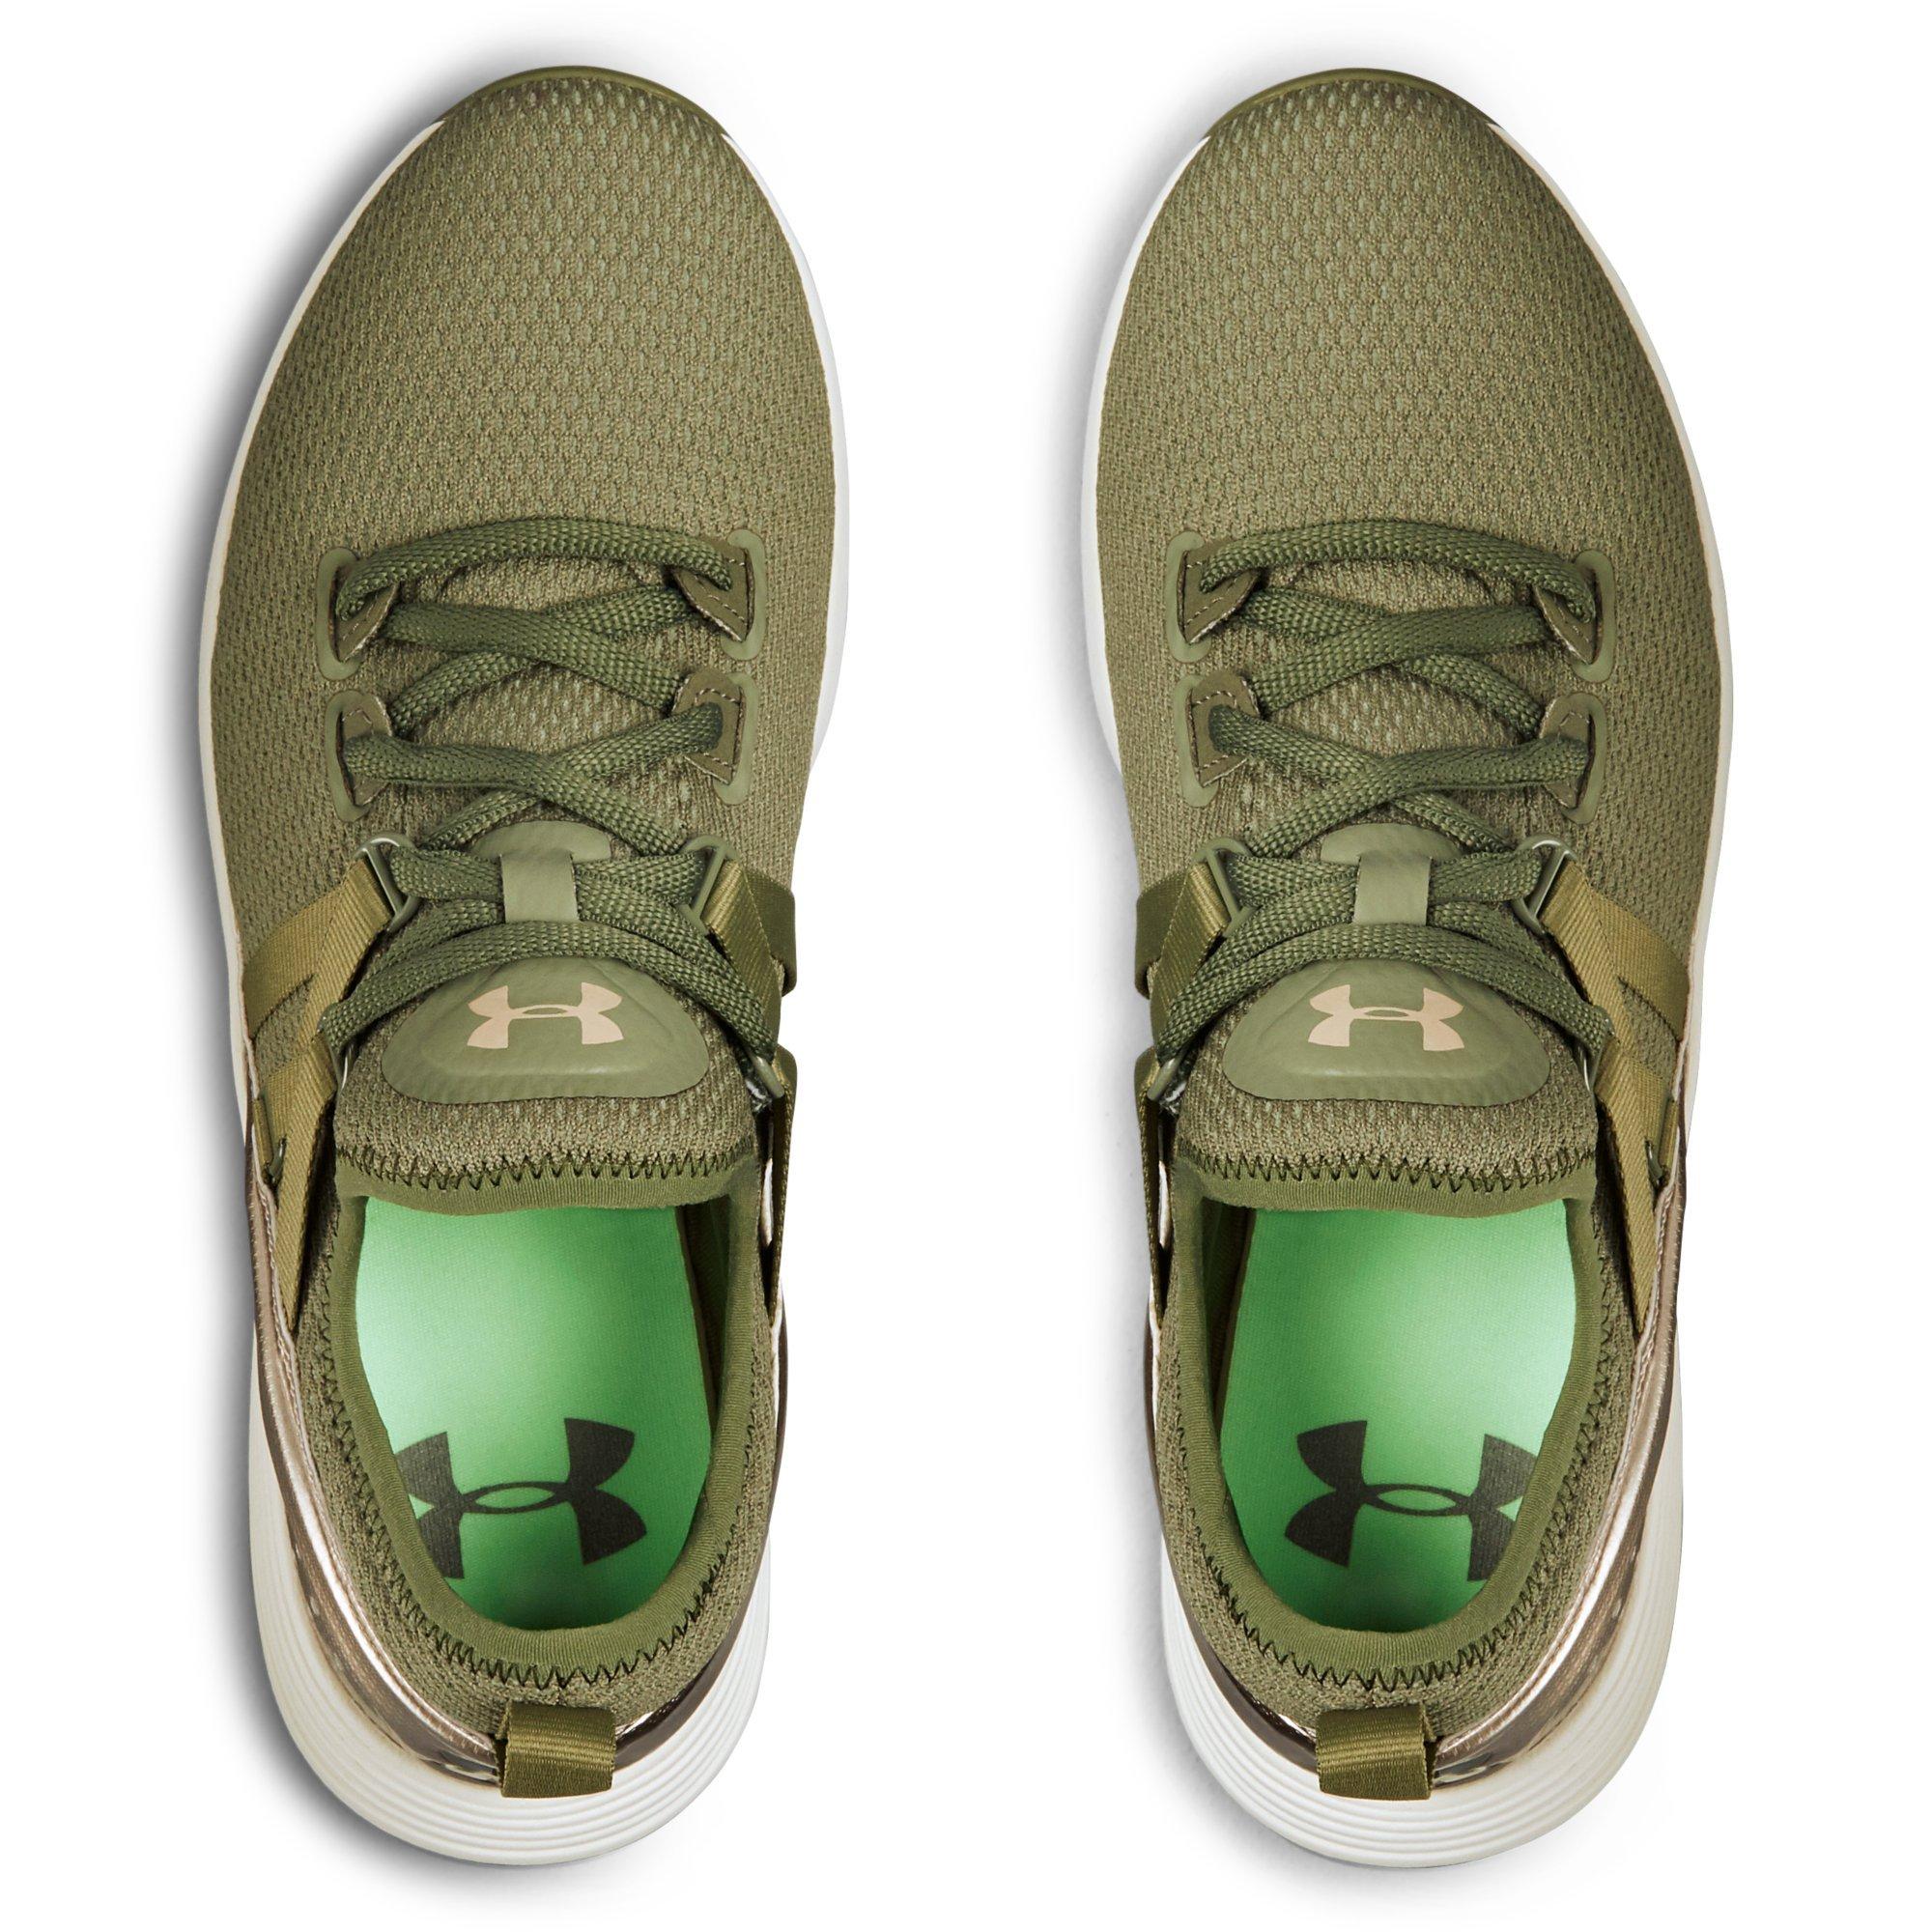 under armour olive green shoes